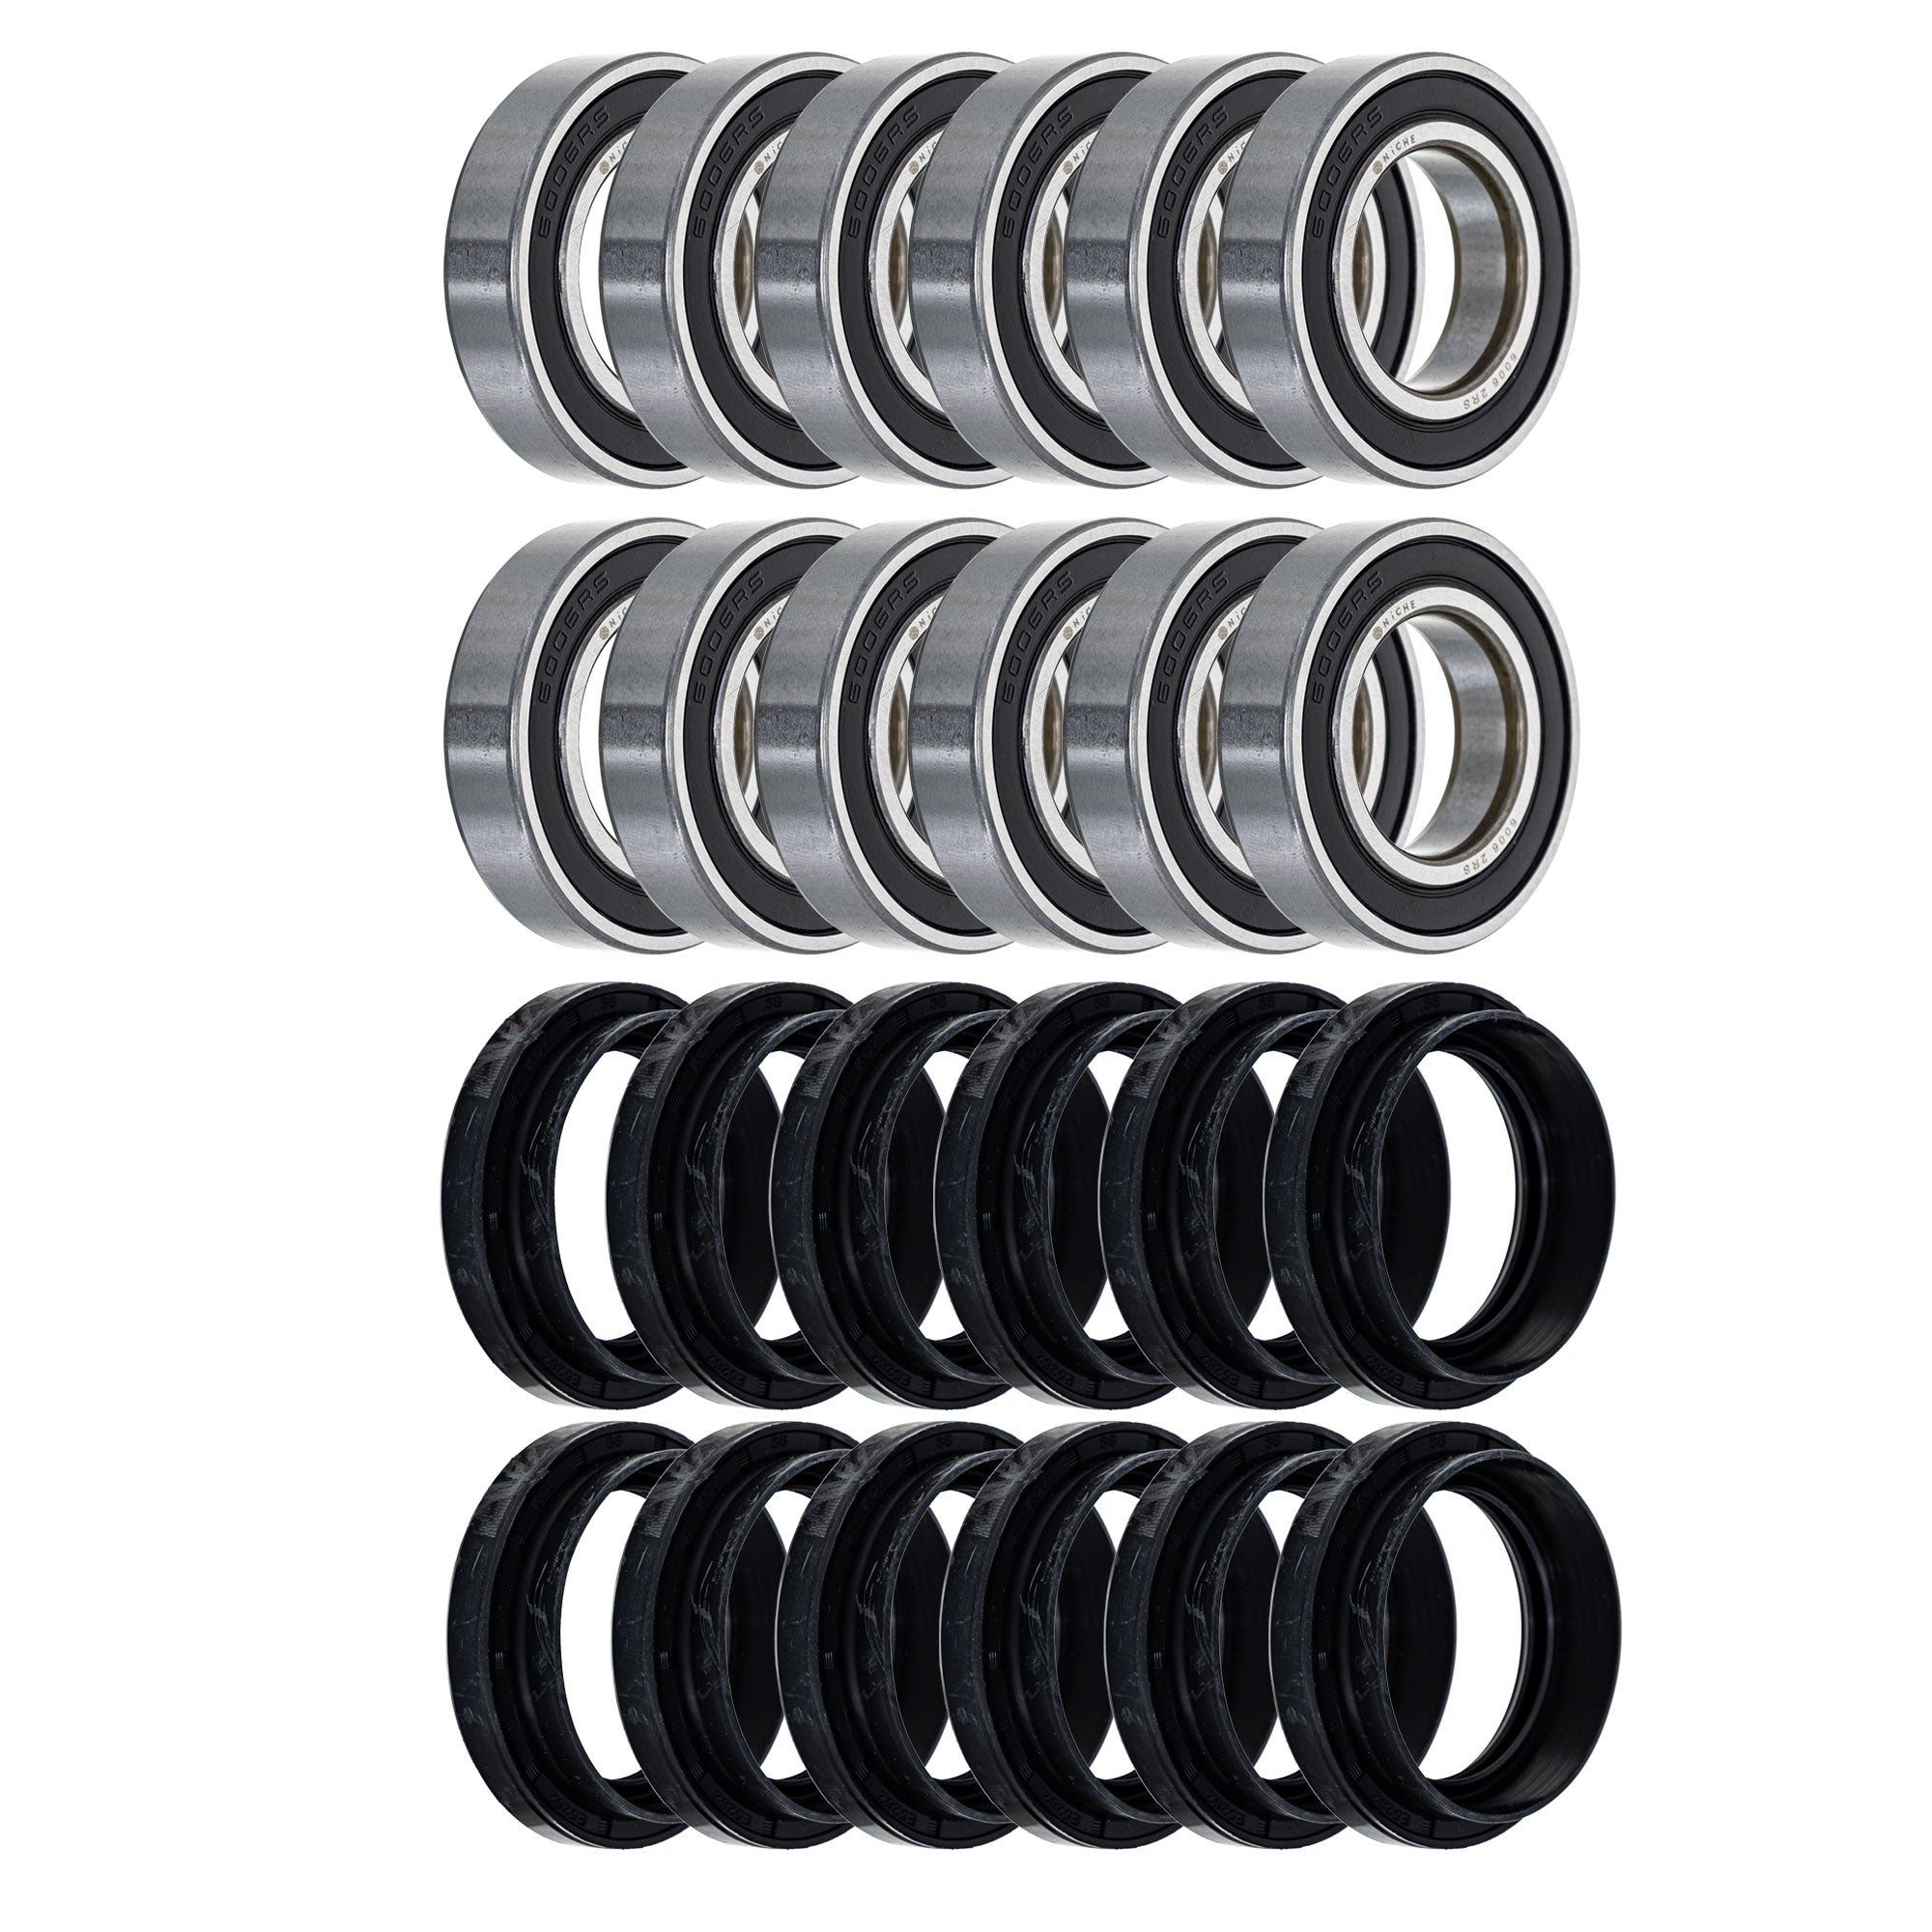 Wheel Bearing Seal Kit for zOTHER Grizzly NICHE MK1008451